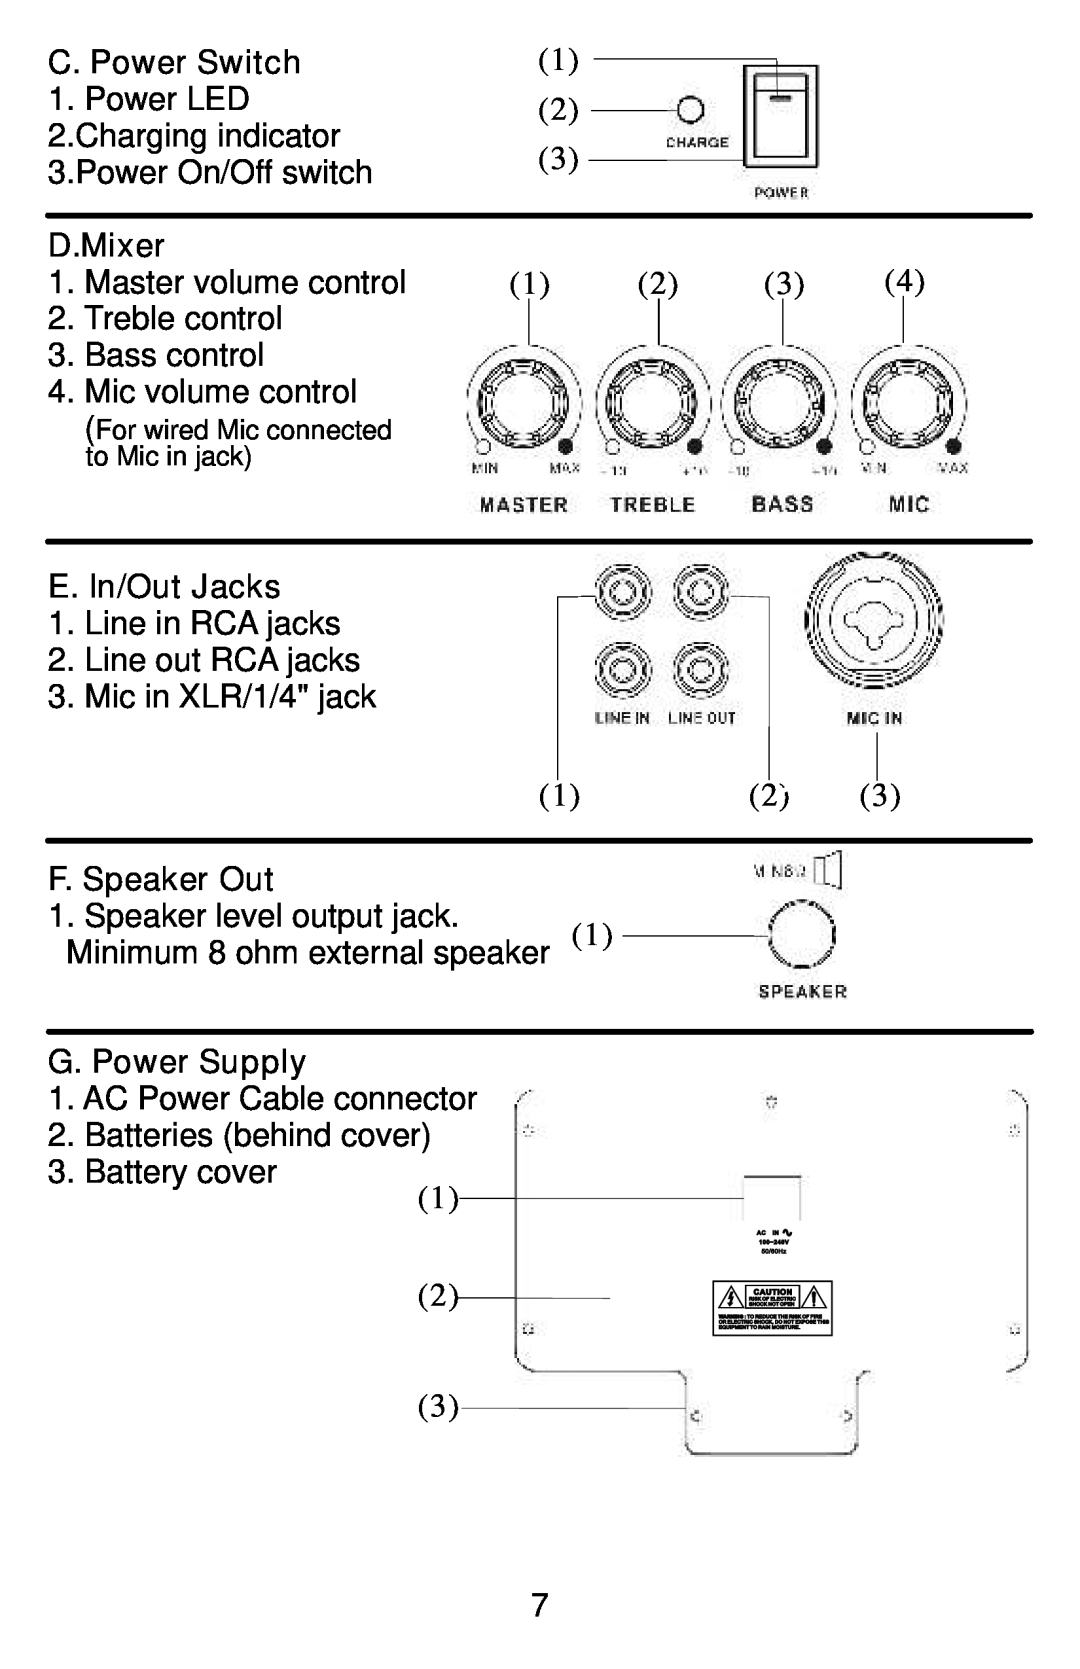 Traveler AS-TV8 manual C. Power Switch, D.Mixer, E. In/Out Jacks, F. Speaker Out, G. Power Supply 